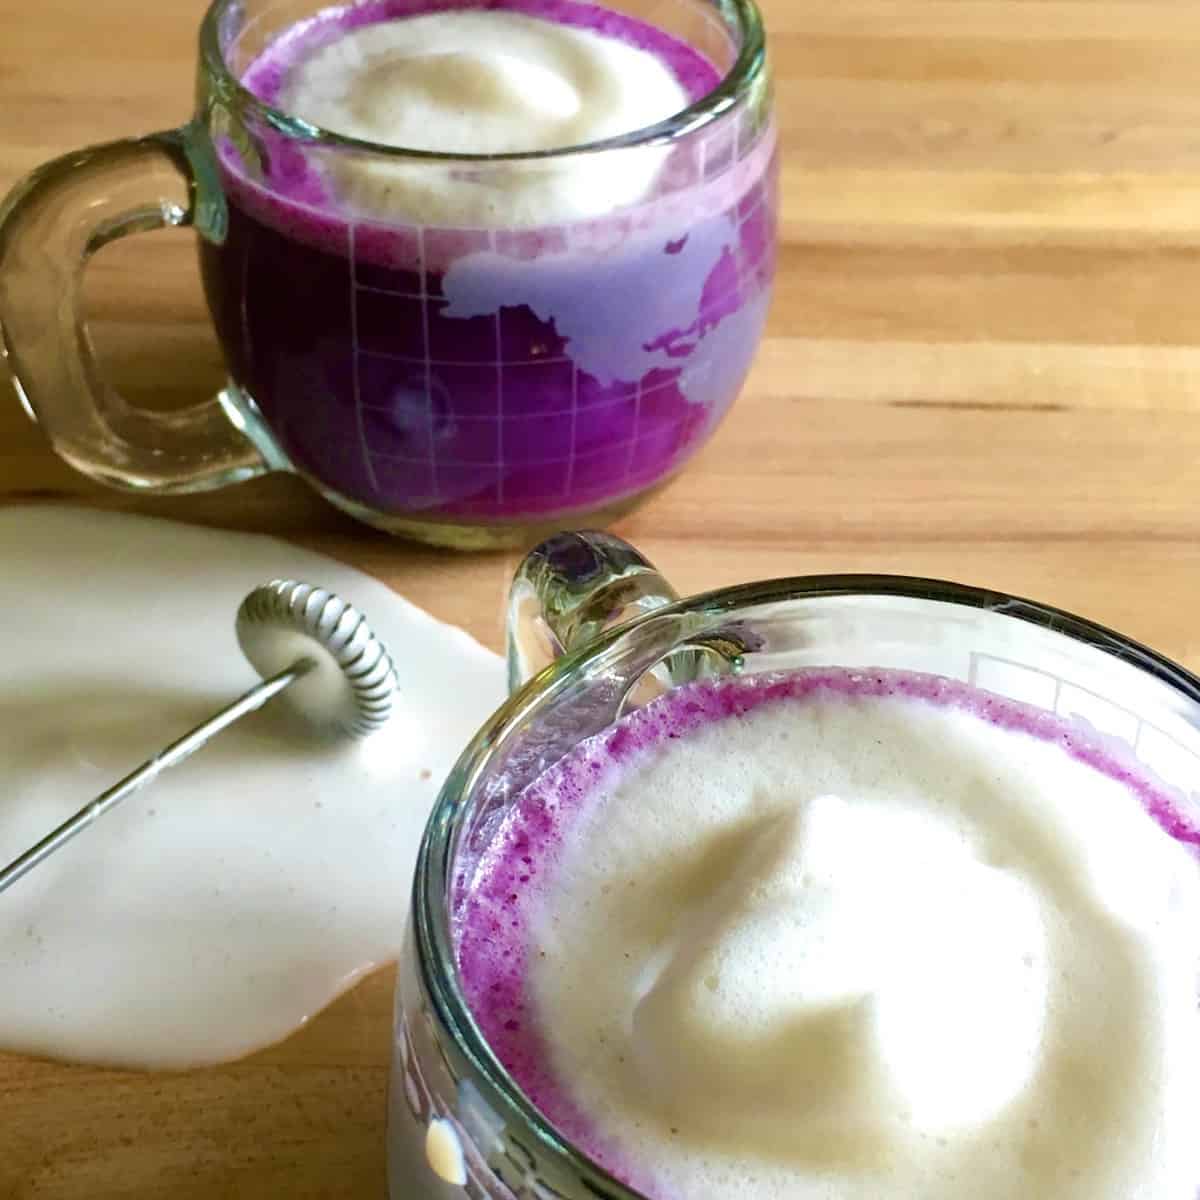 blueberry latte with spilled milk